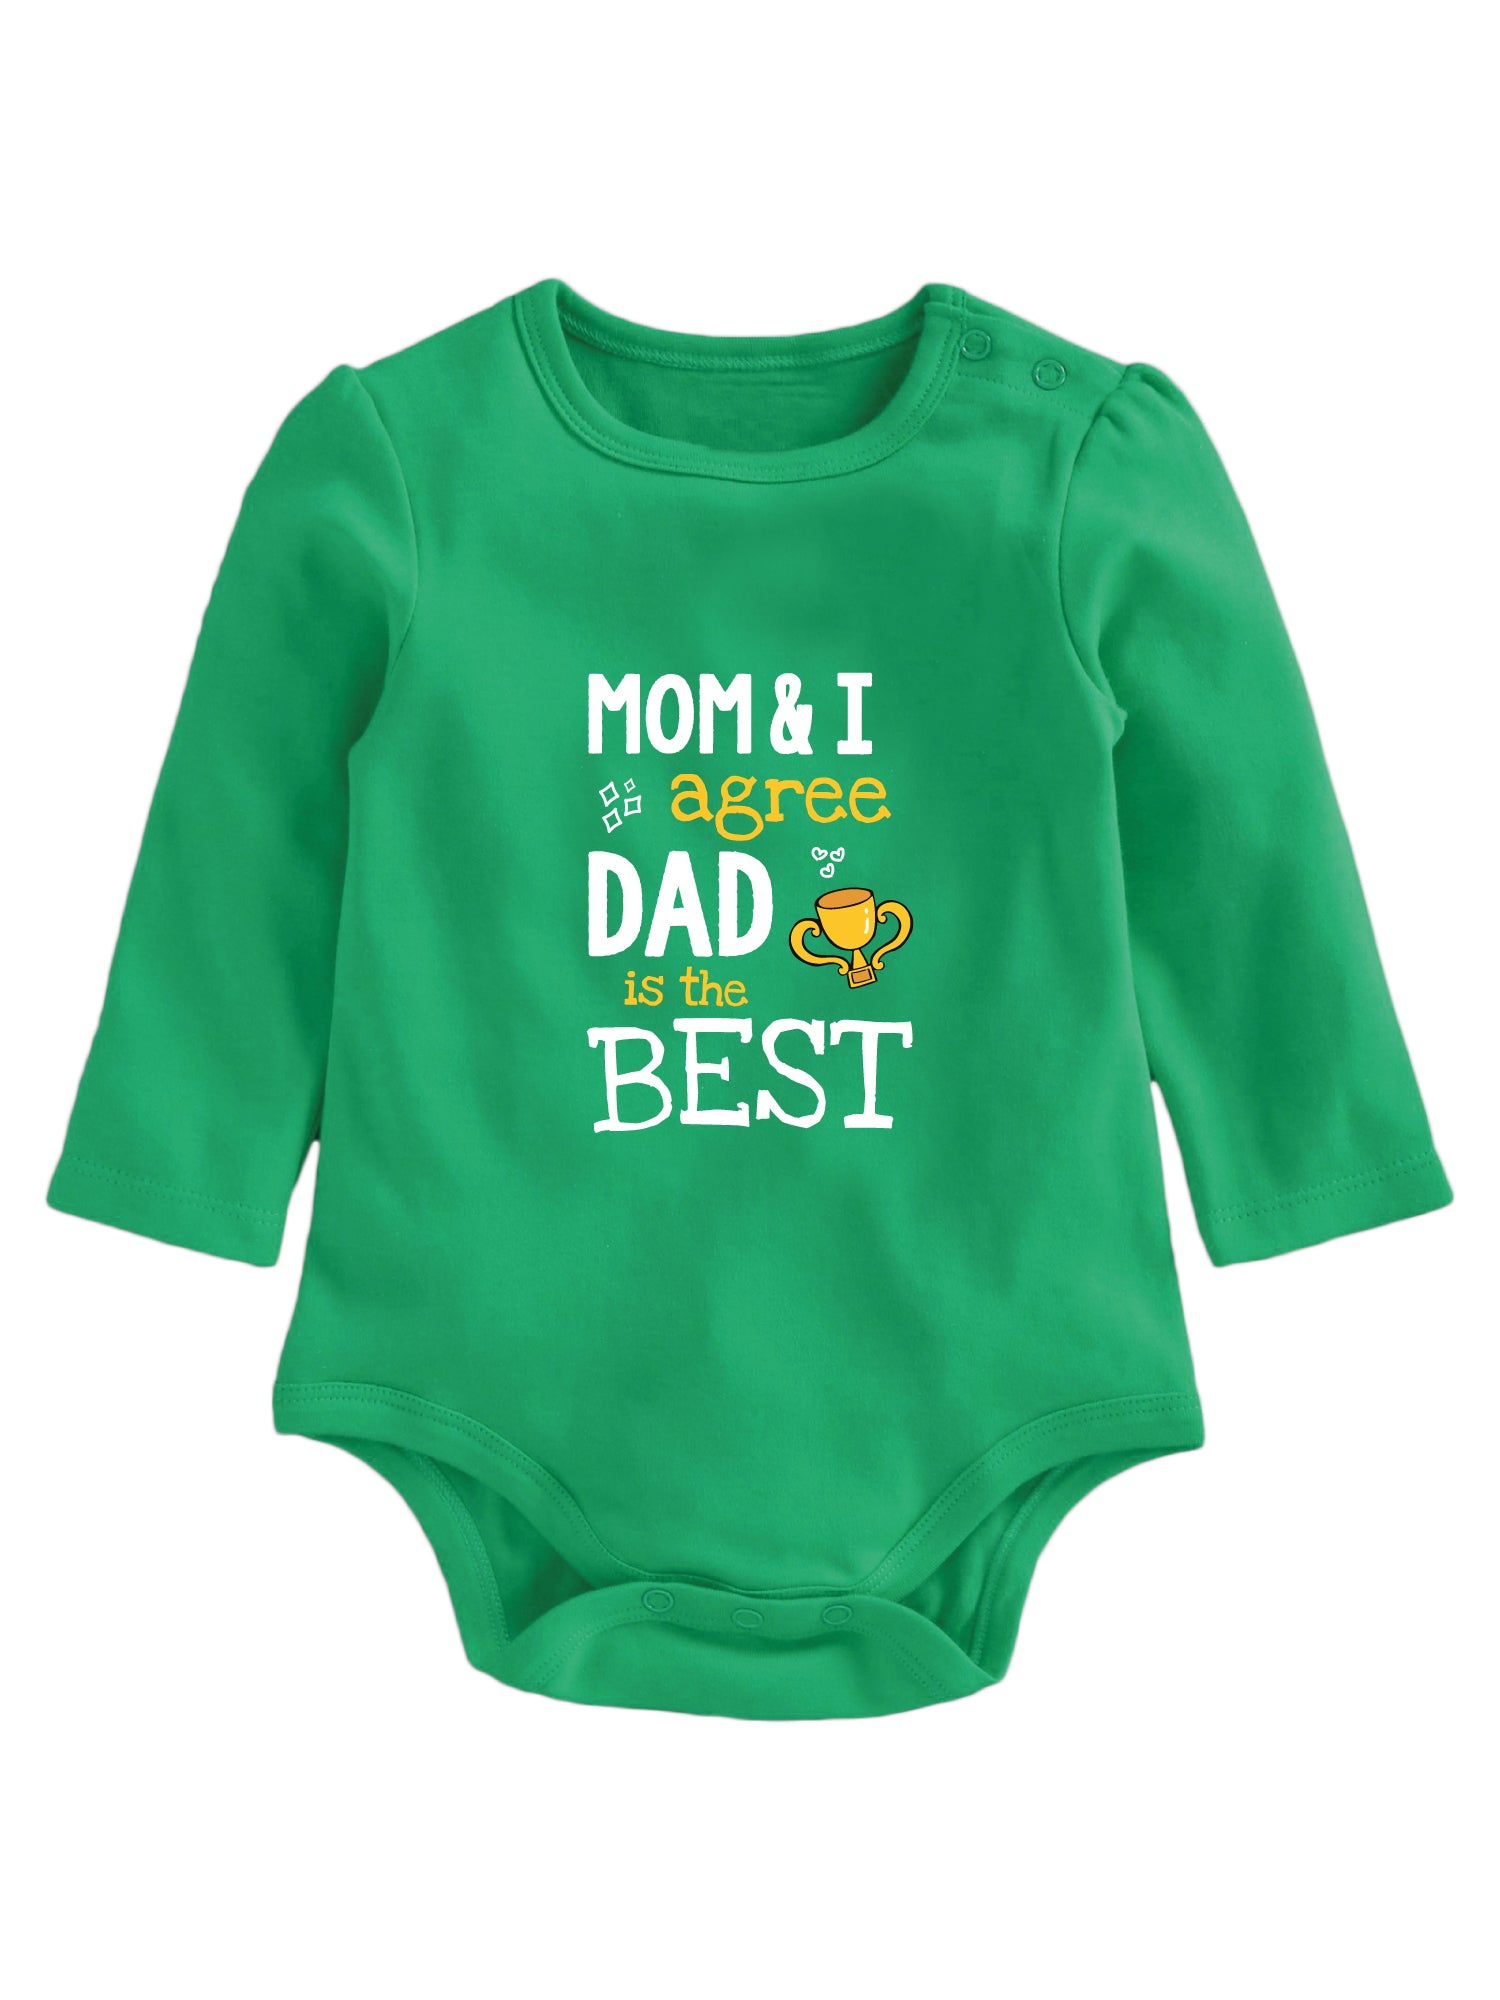 MOM & I Agree Dad is the Best - Onesie